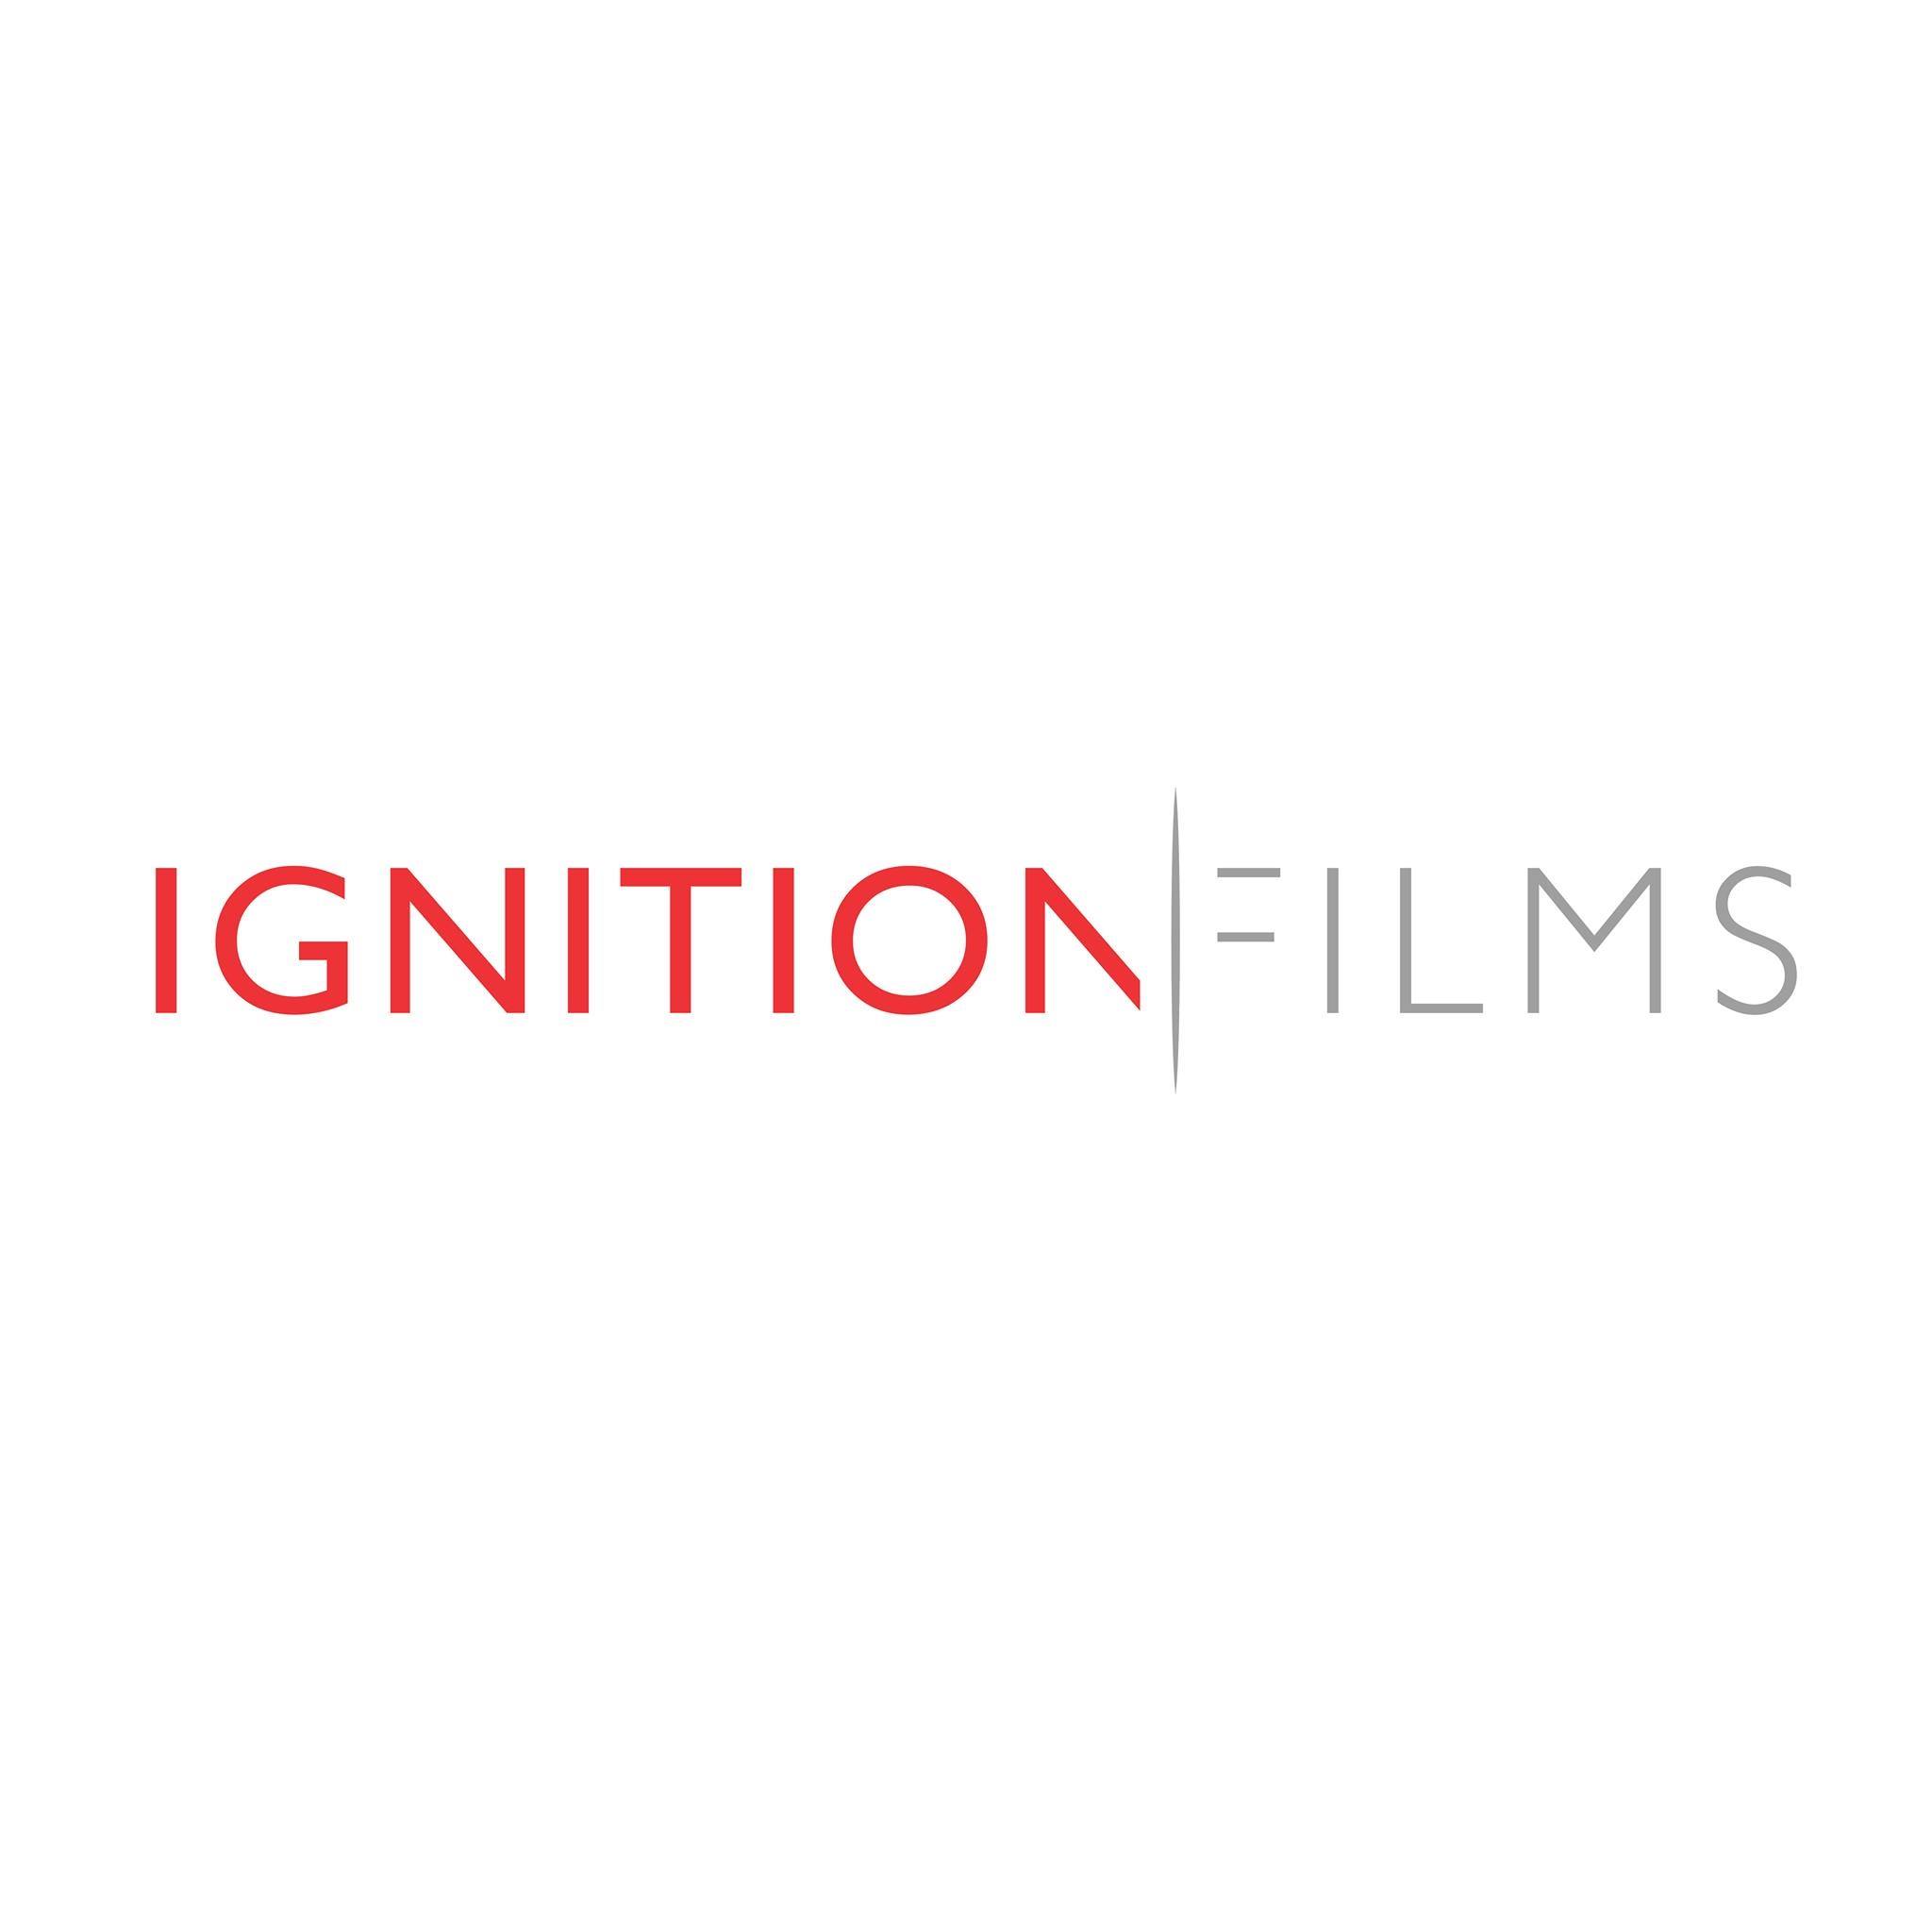 Ignition Films - The Green & Sun, produced by composer Arron Storey